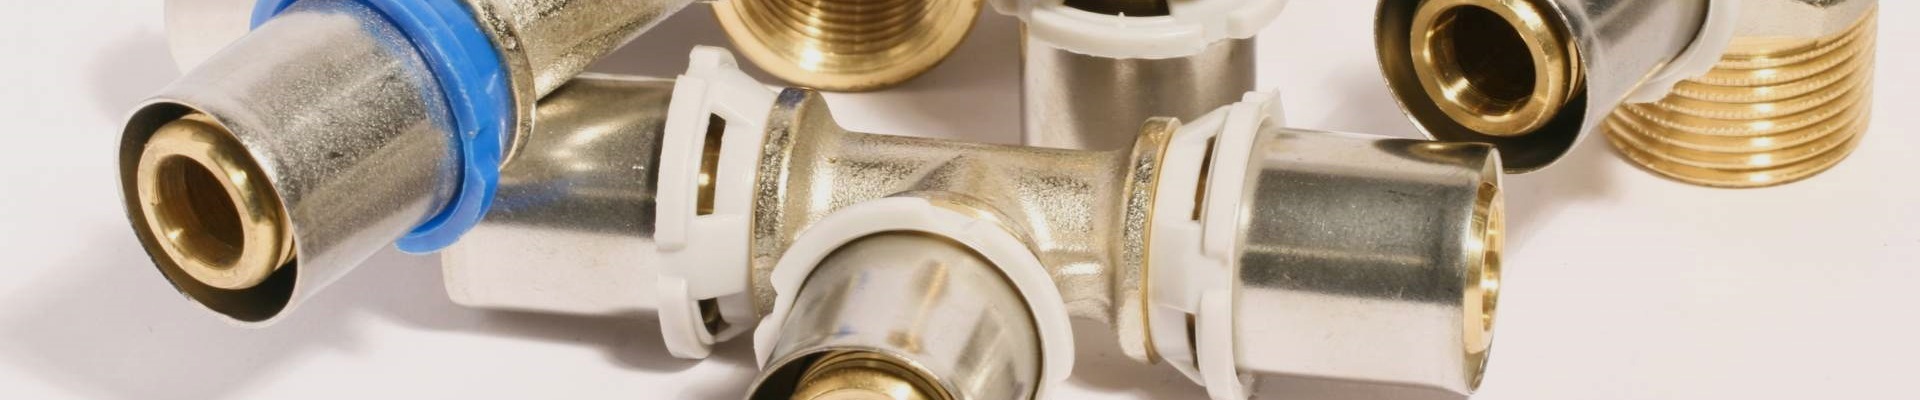 Request Service Plumbers Sharnbrook, Great Barford, MK44